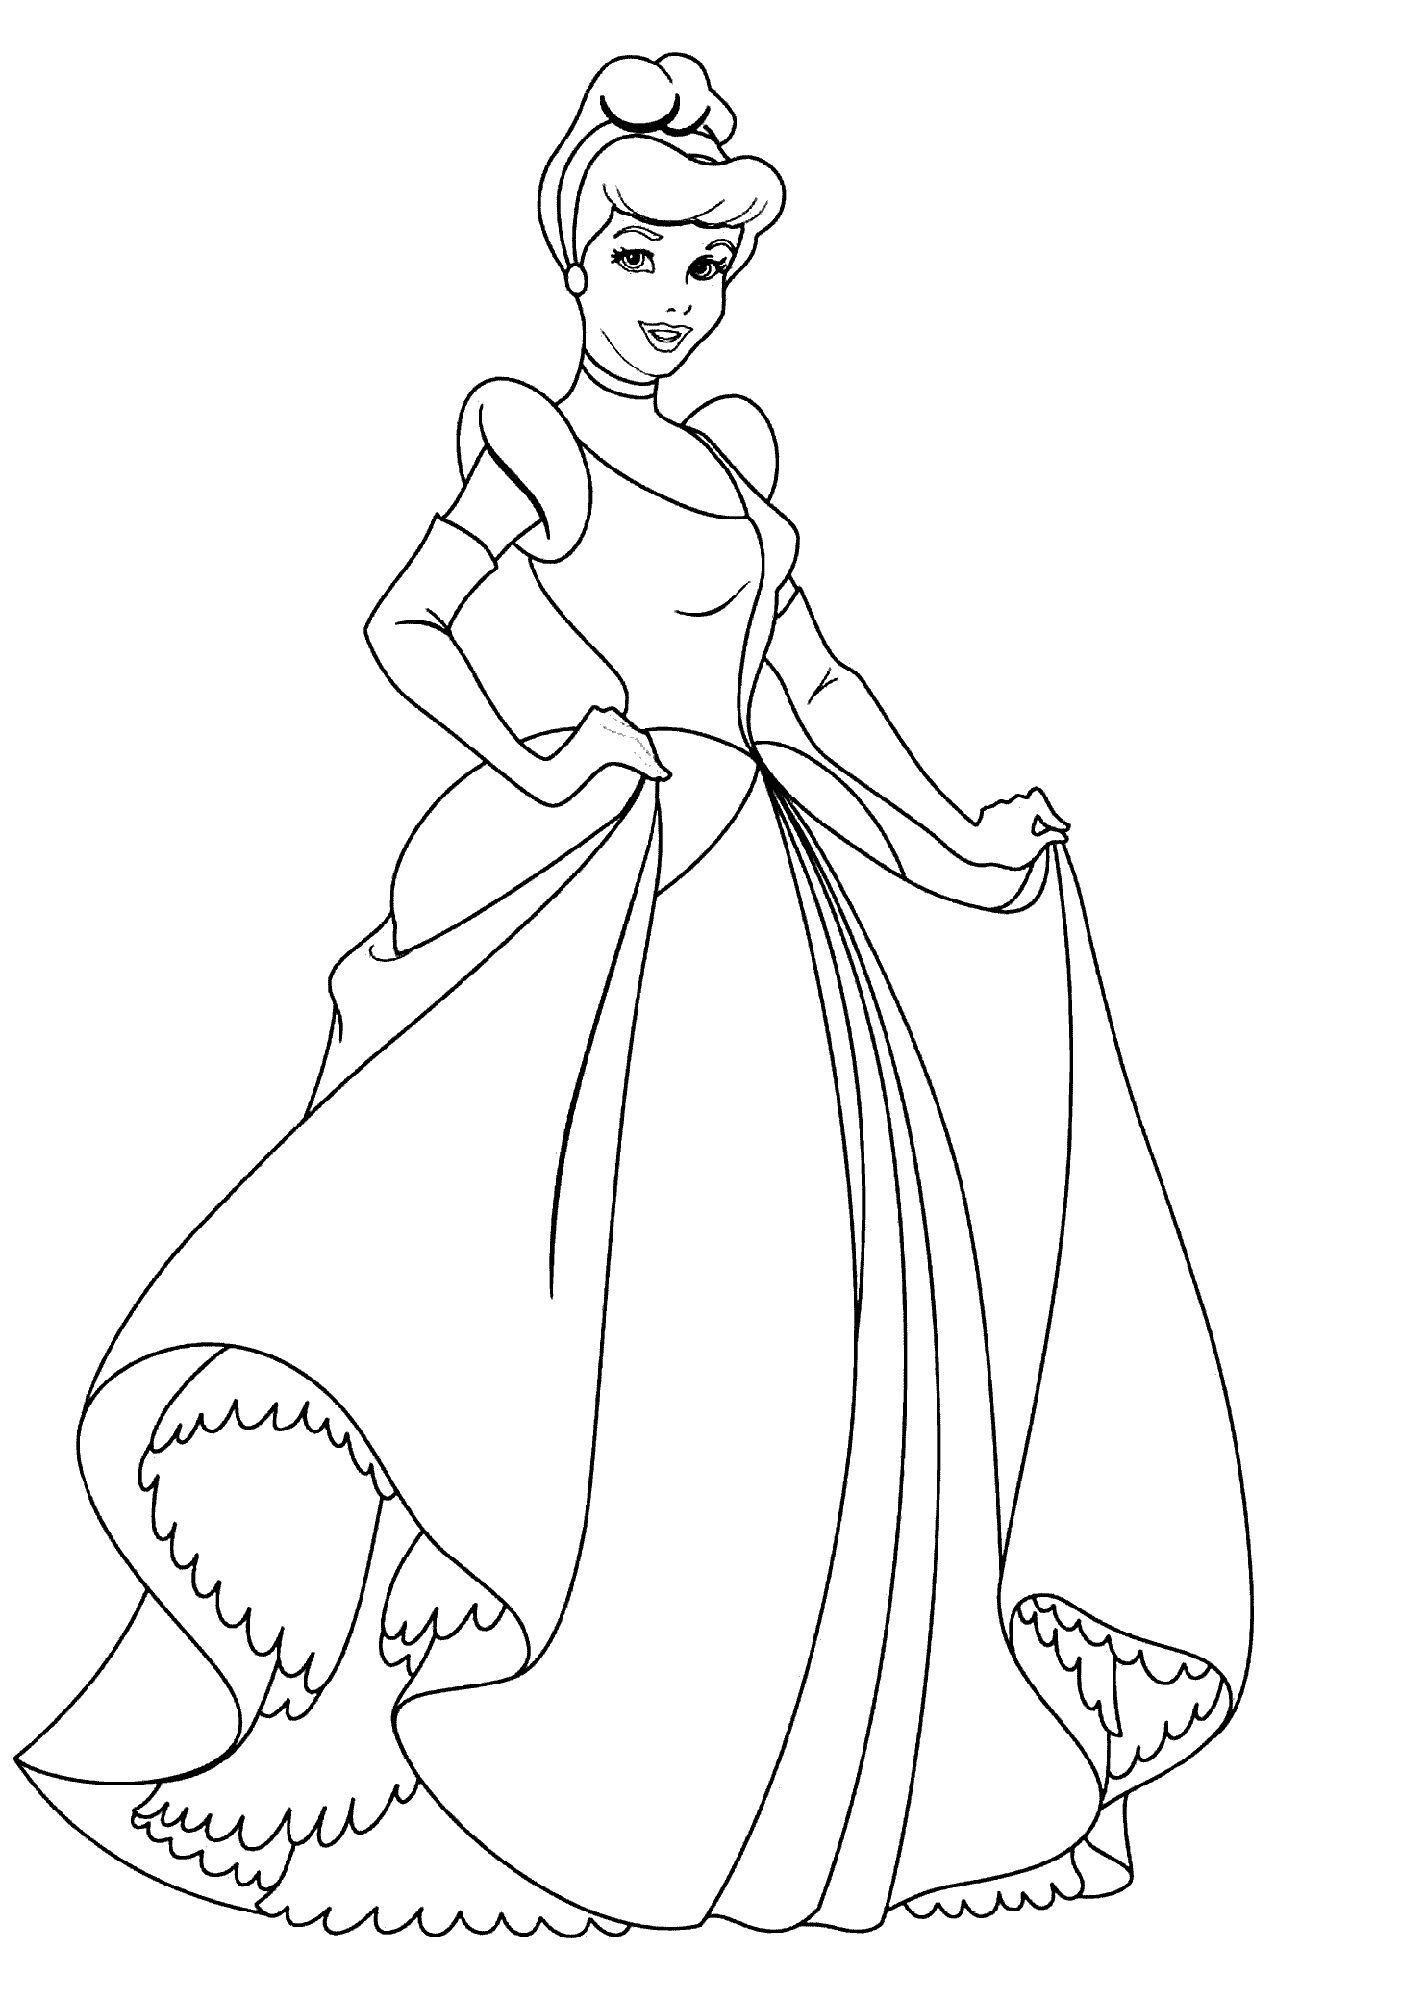 Princess Cinderella Coloring Pages for Coloring Class | K5 ...